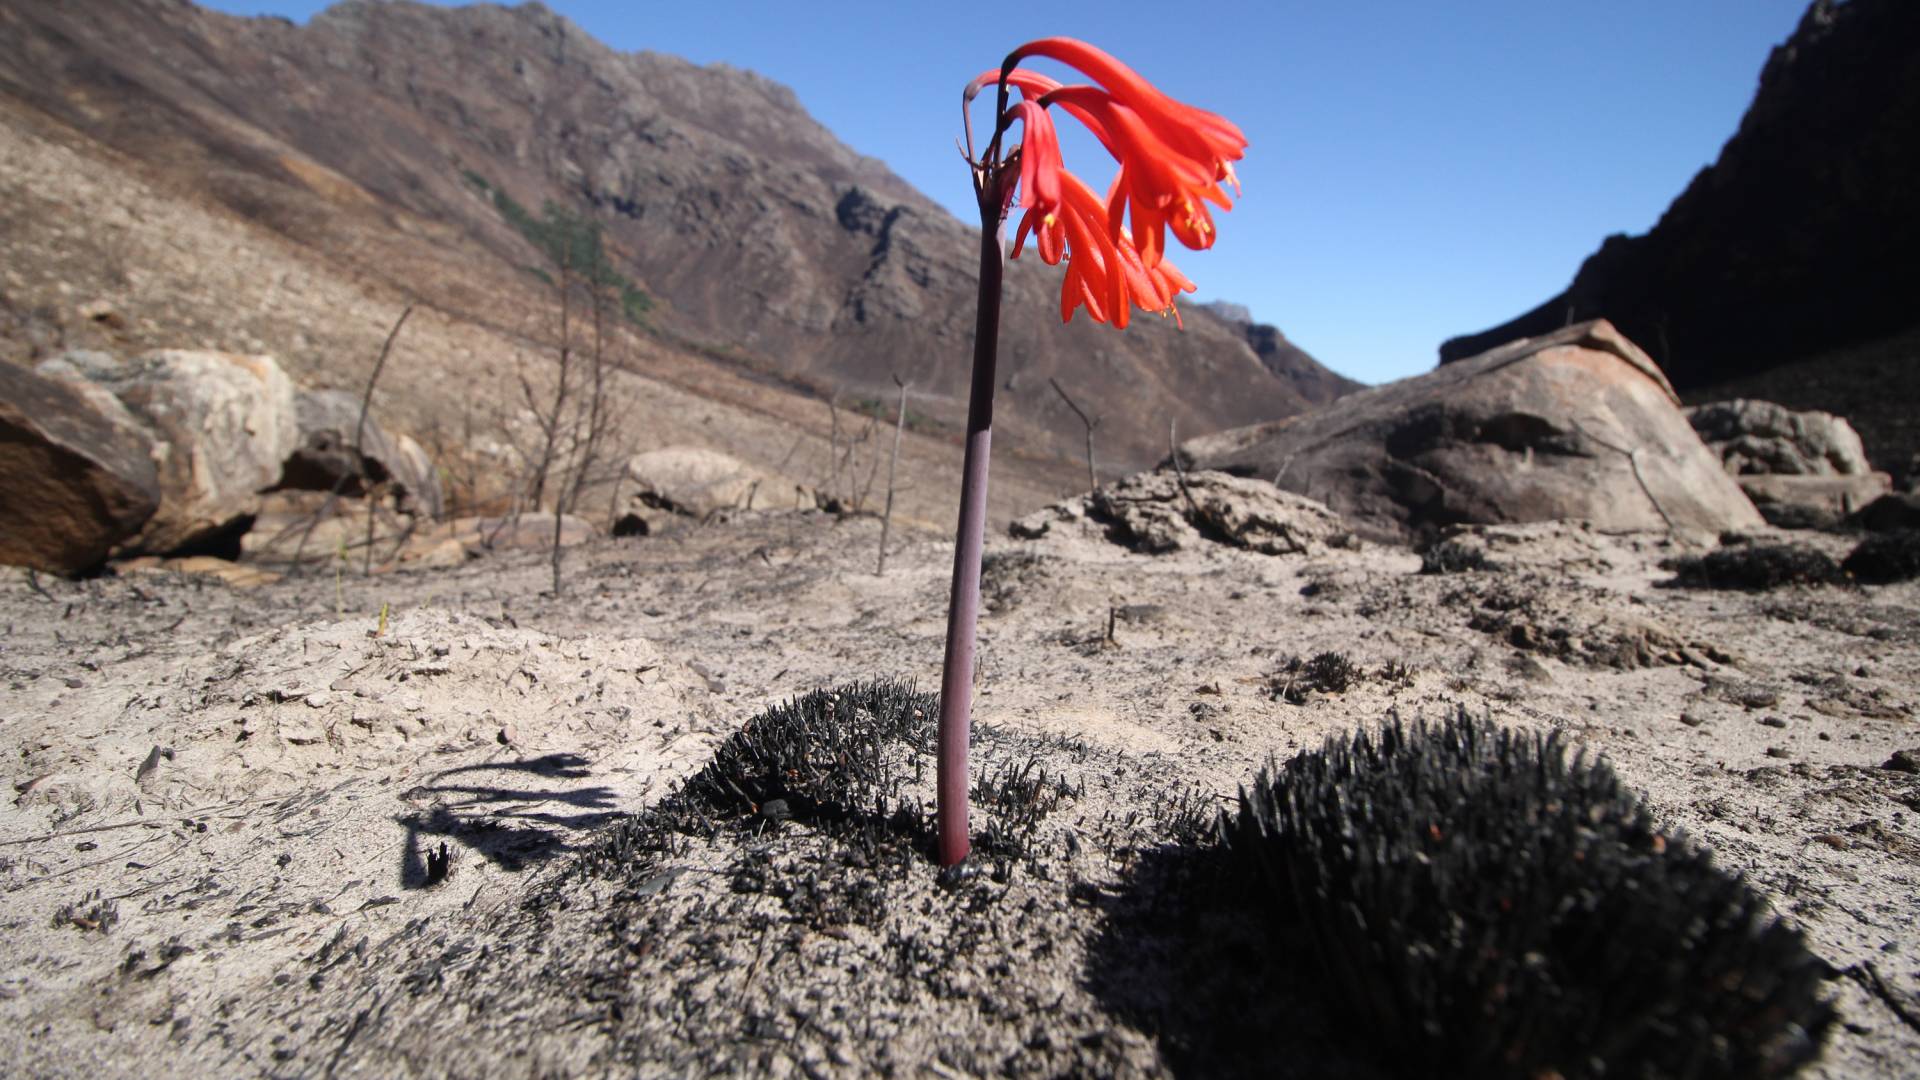 a plant, flowering red blossoms, emerges out of barren-looking soil